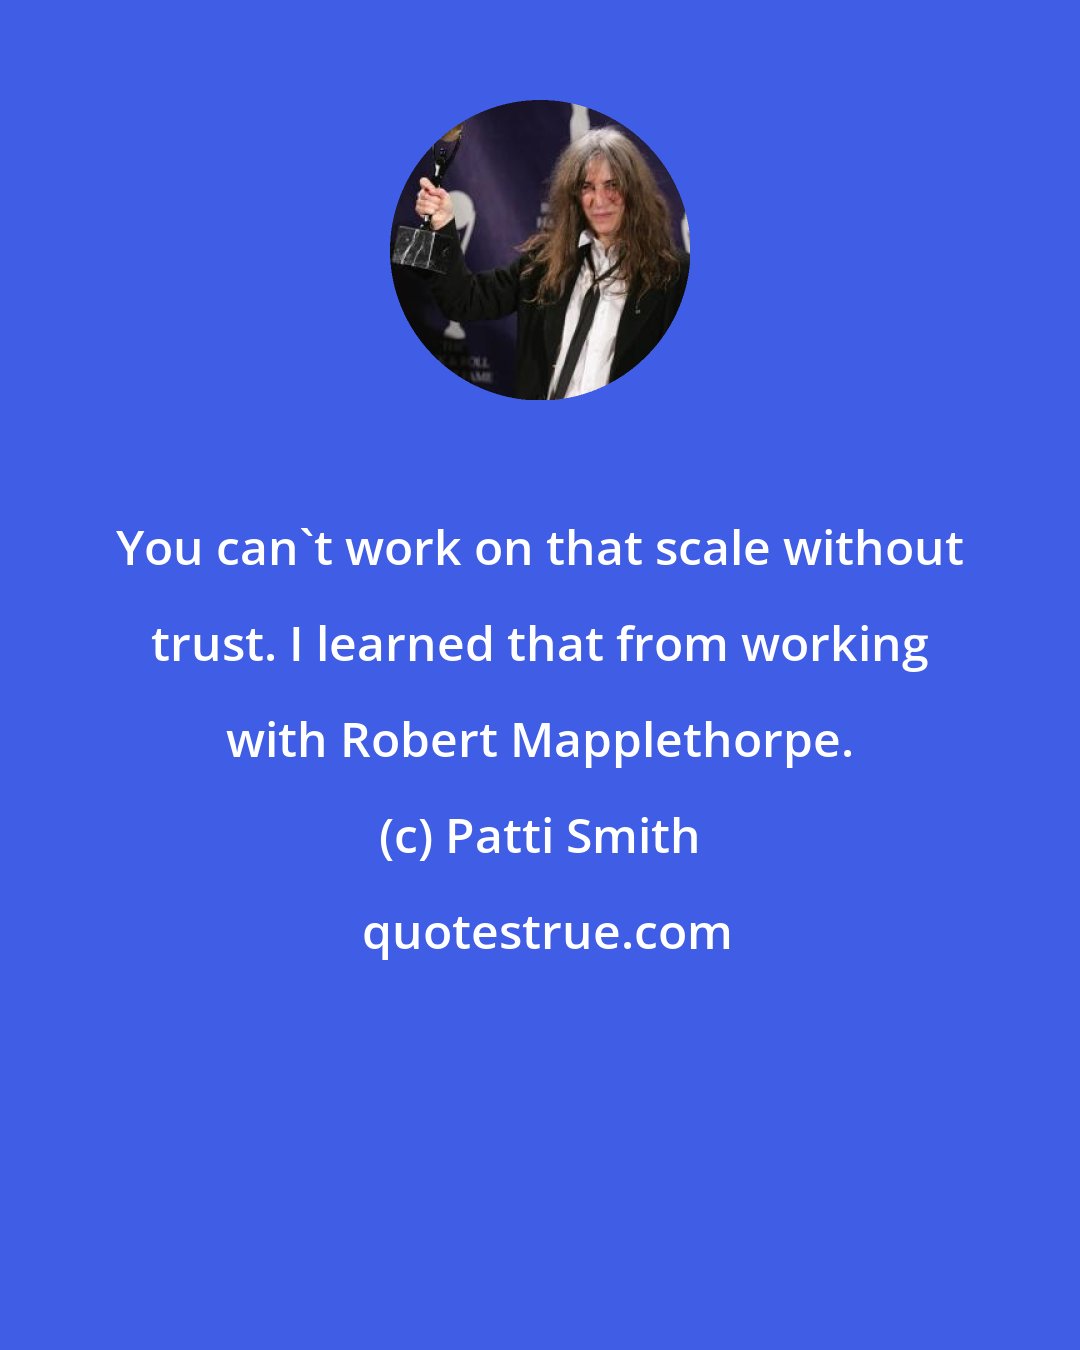 Patti Smith: You can't work on that scale without trust. I learned that from working with Robert Mapplethorpe.